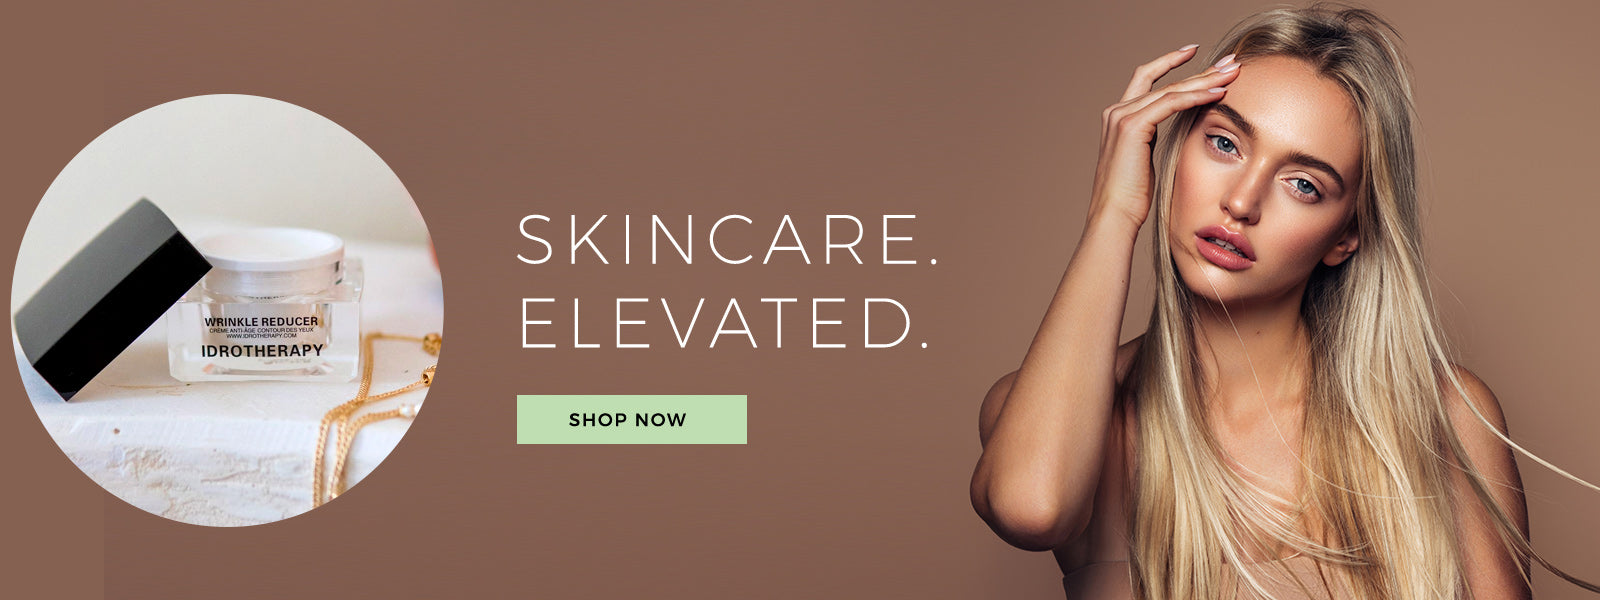 Skincare elevated - Shop Now